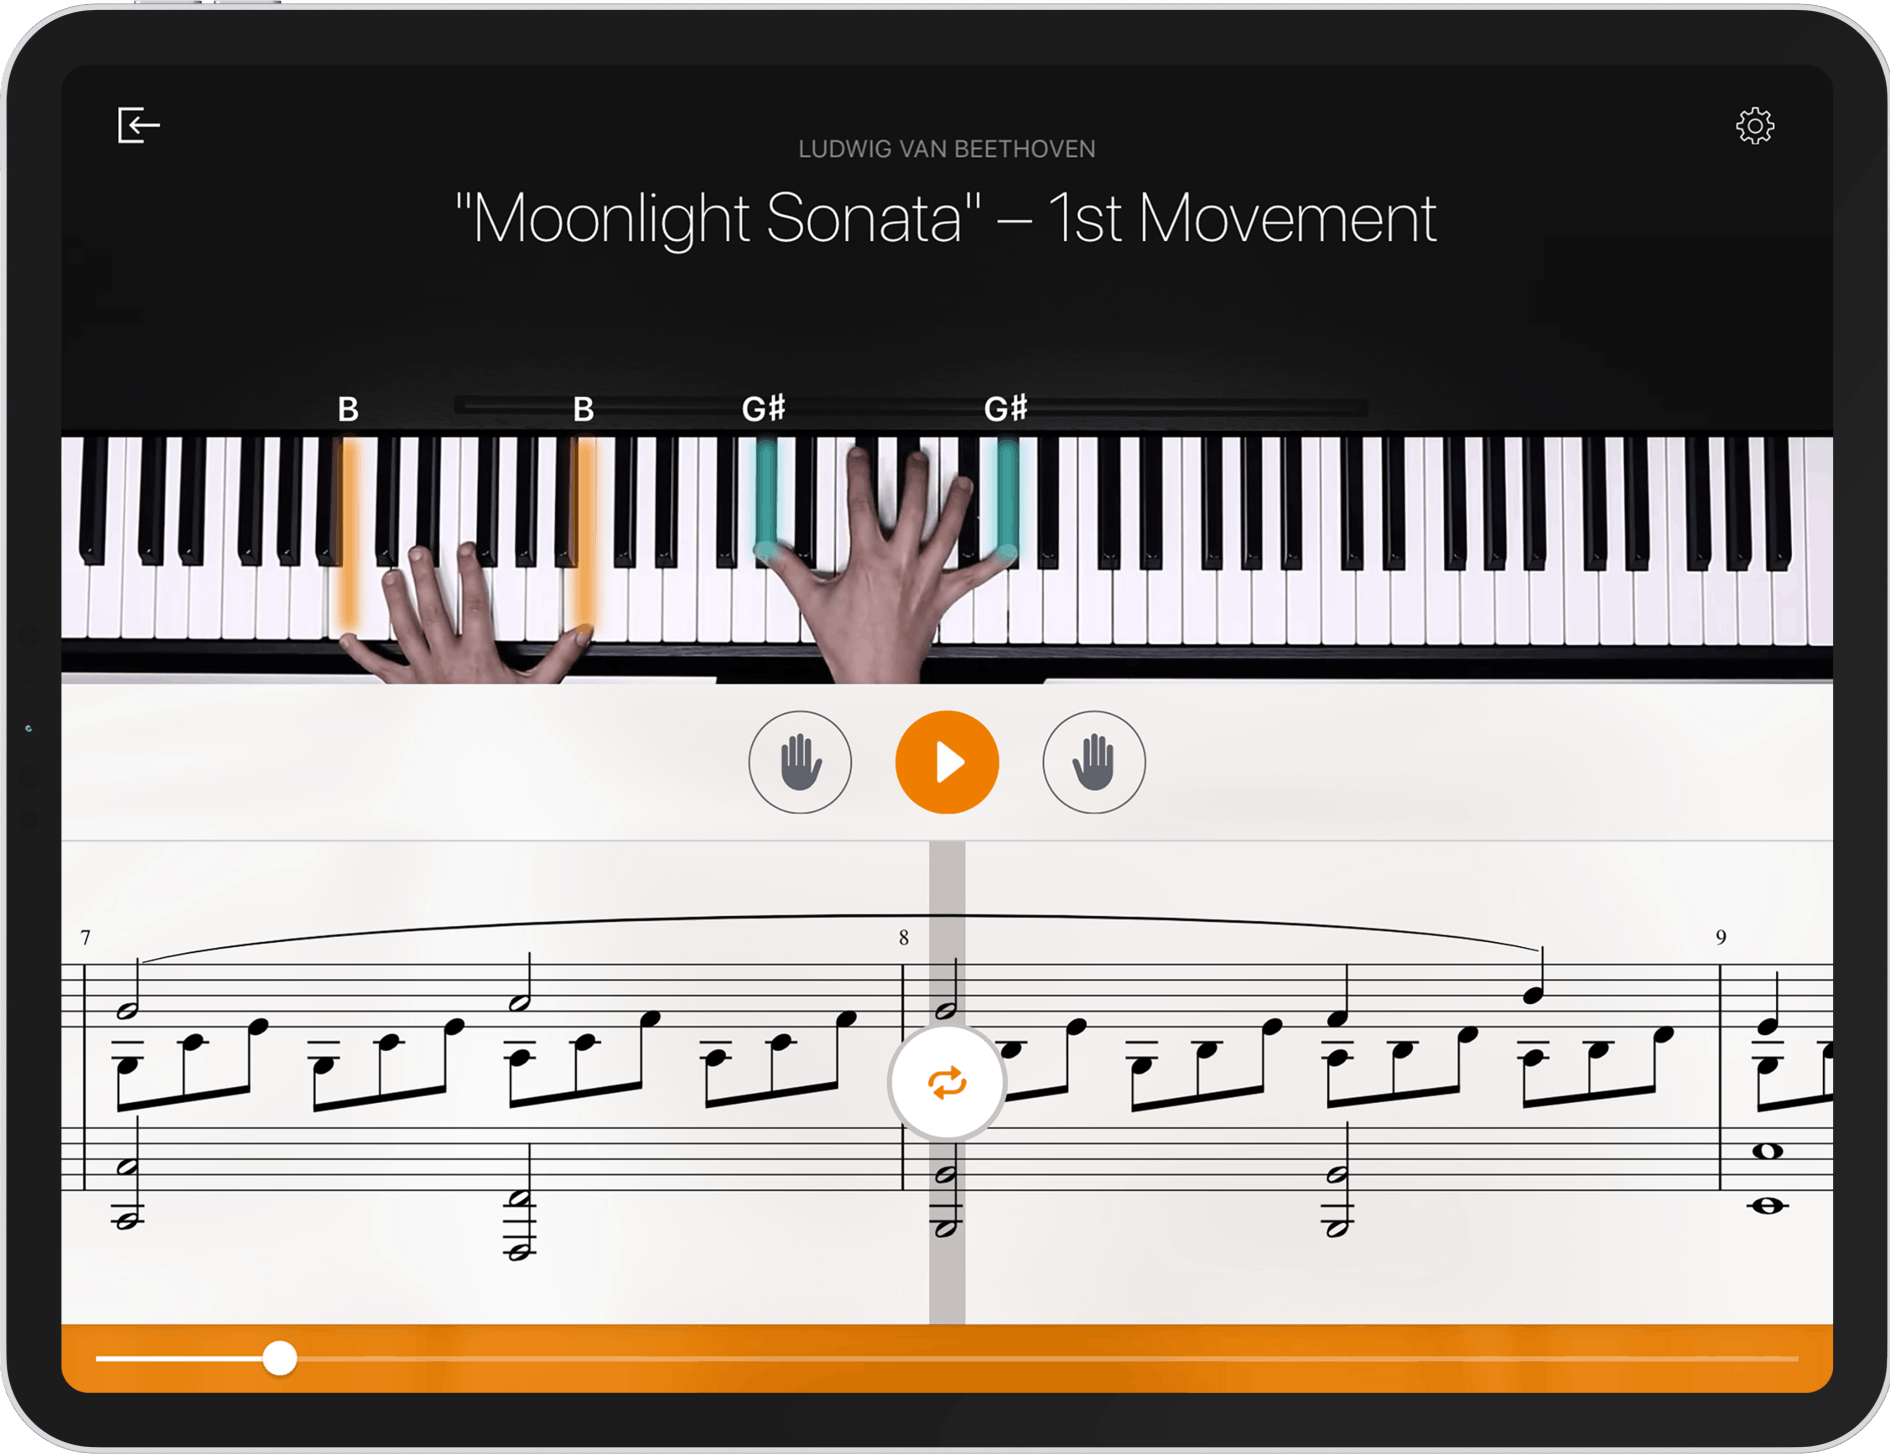 Learn To Play Piano - 200 Videos Of Online Piano Lessons - YouTube